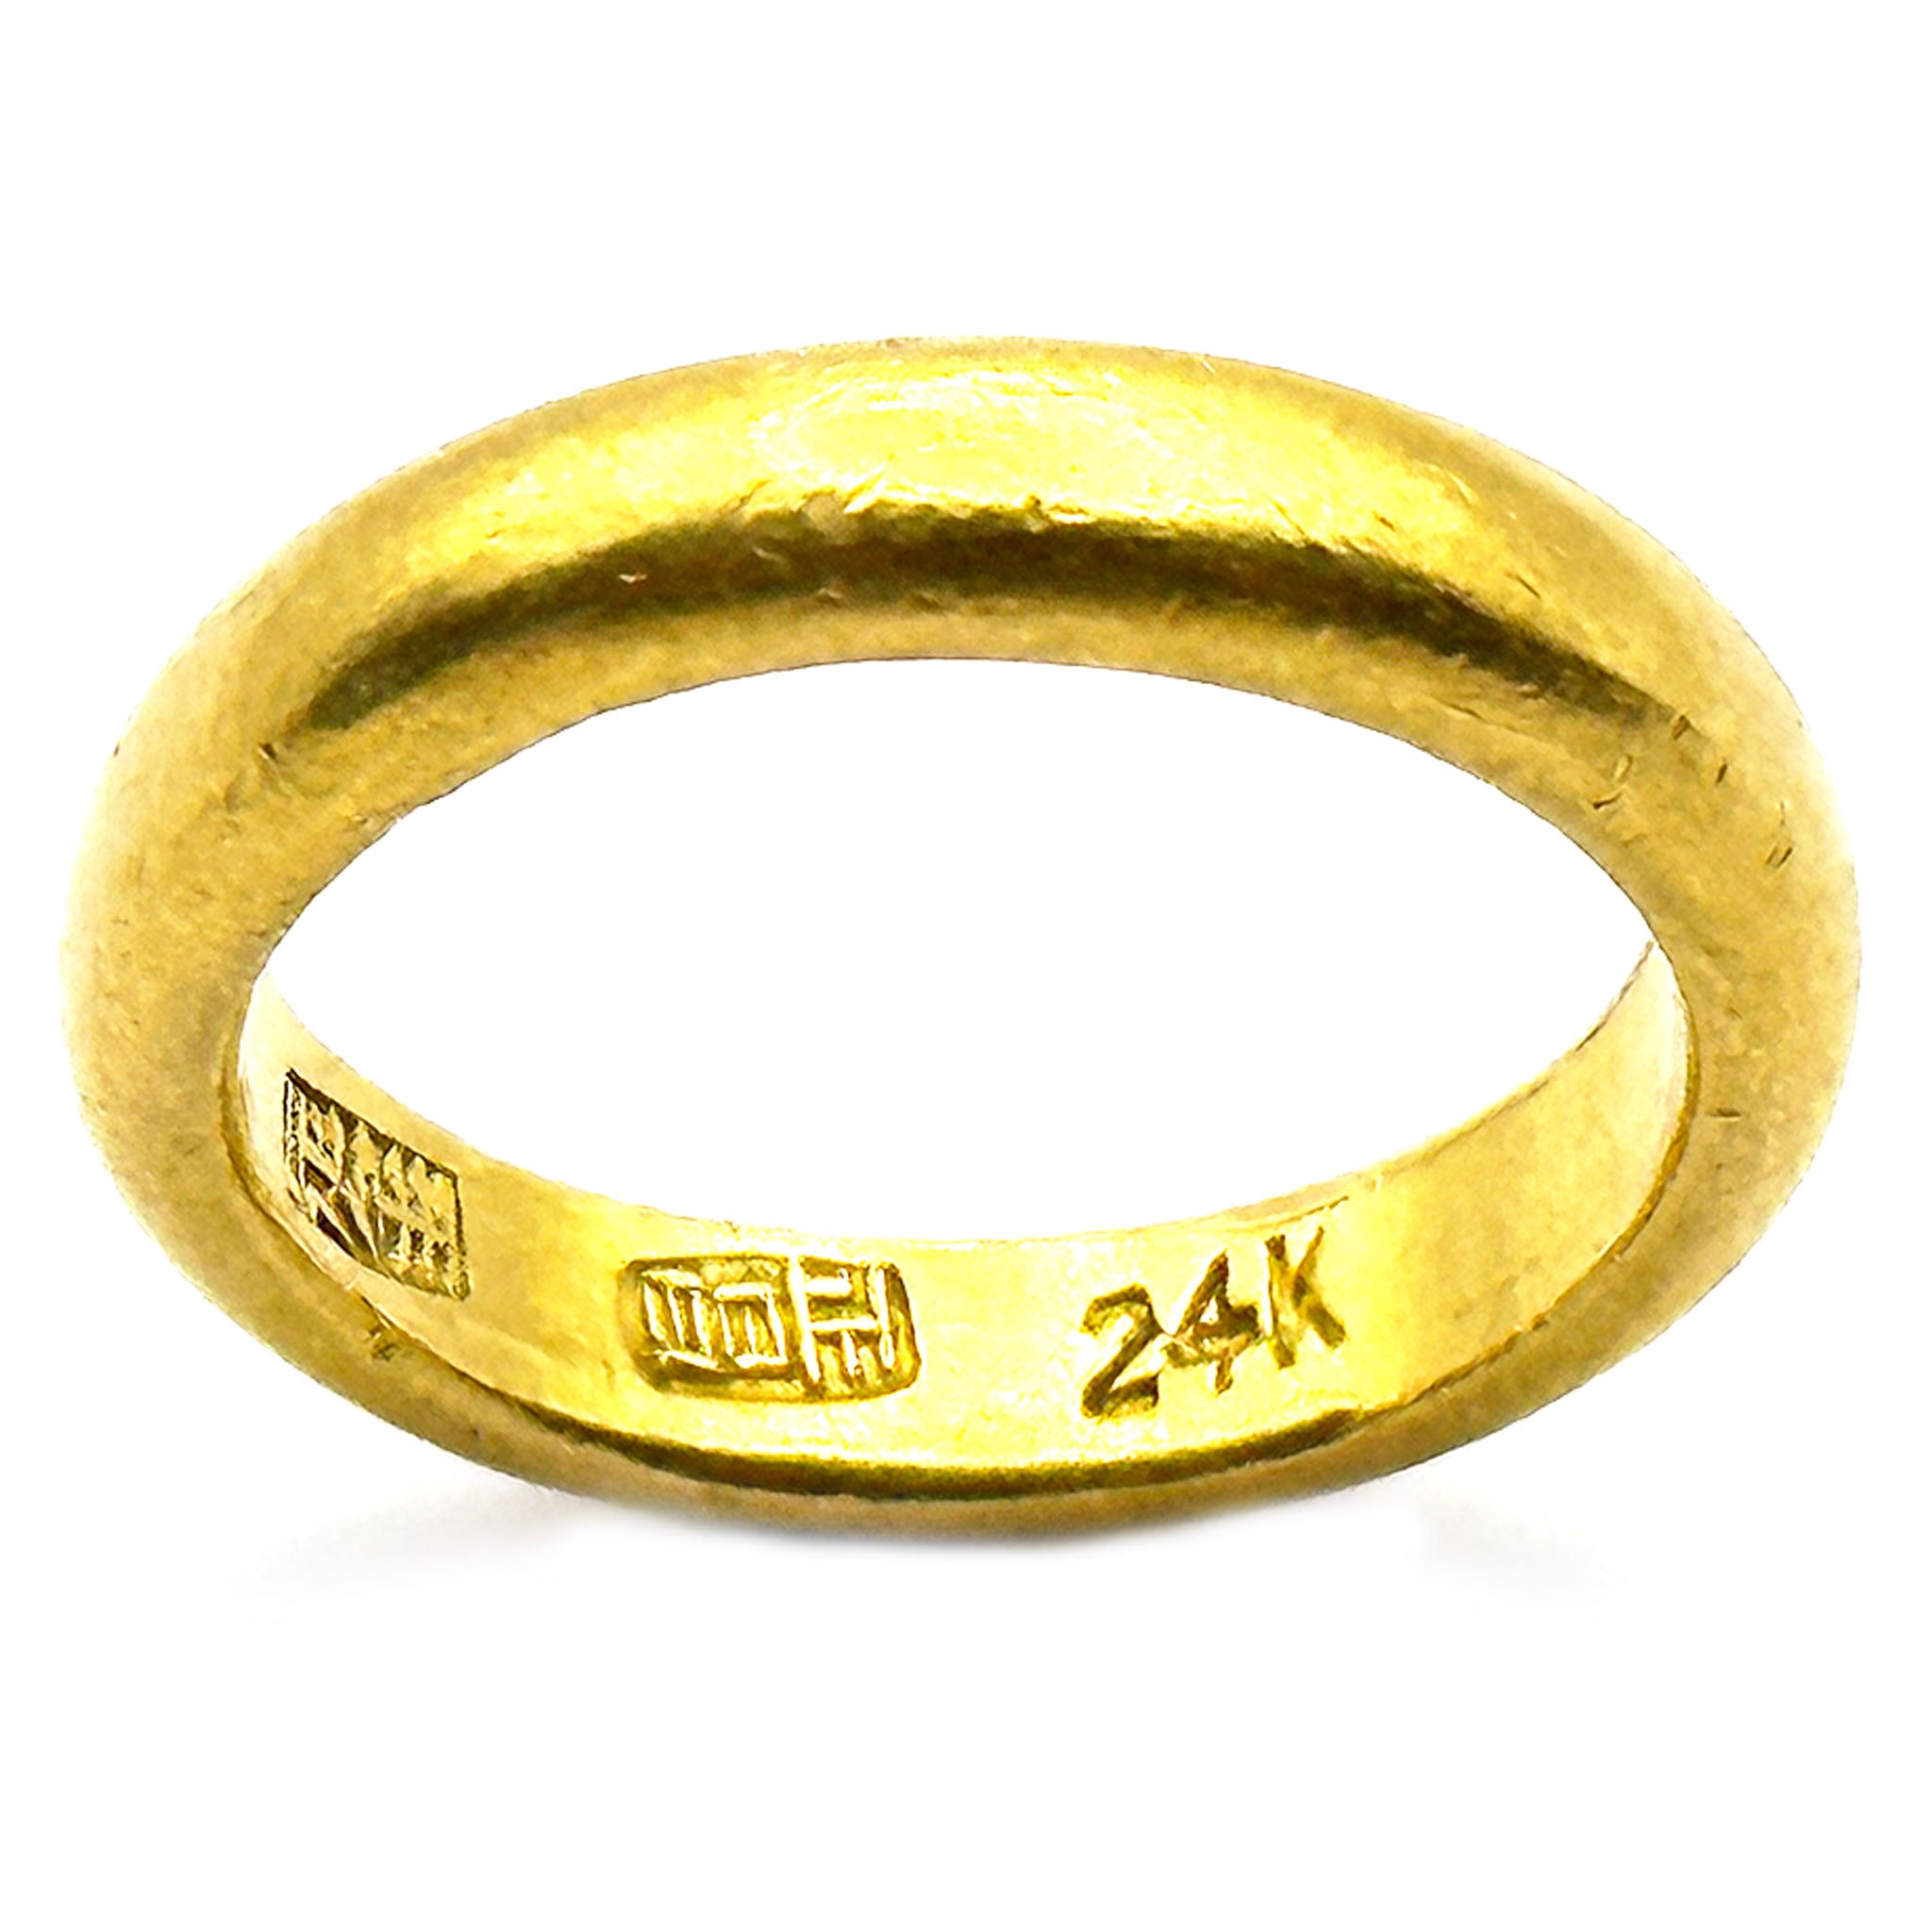 $2900 24Kt Yellow Gold 4 MM Wedding Band Ring Size 5.5